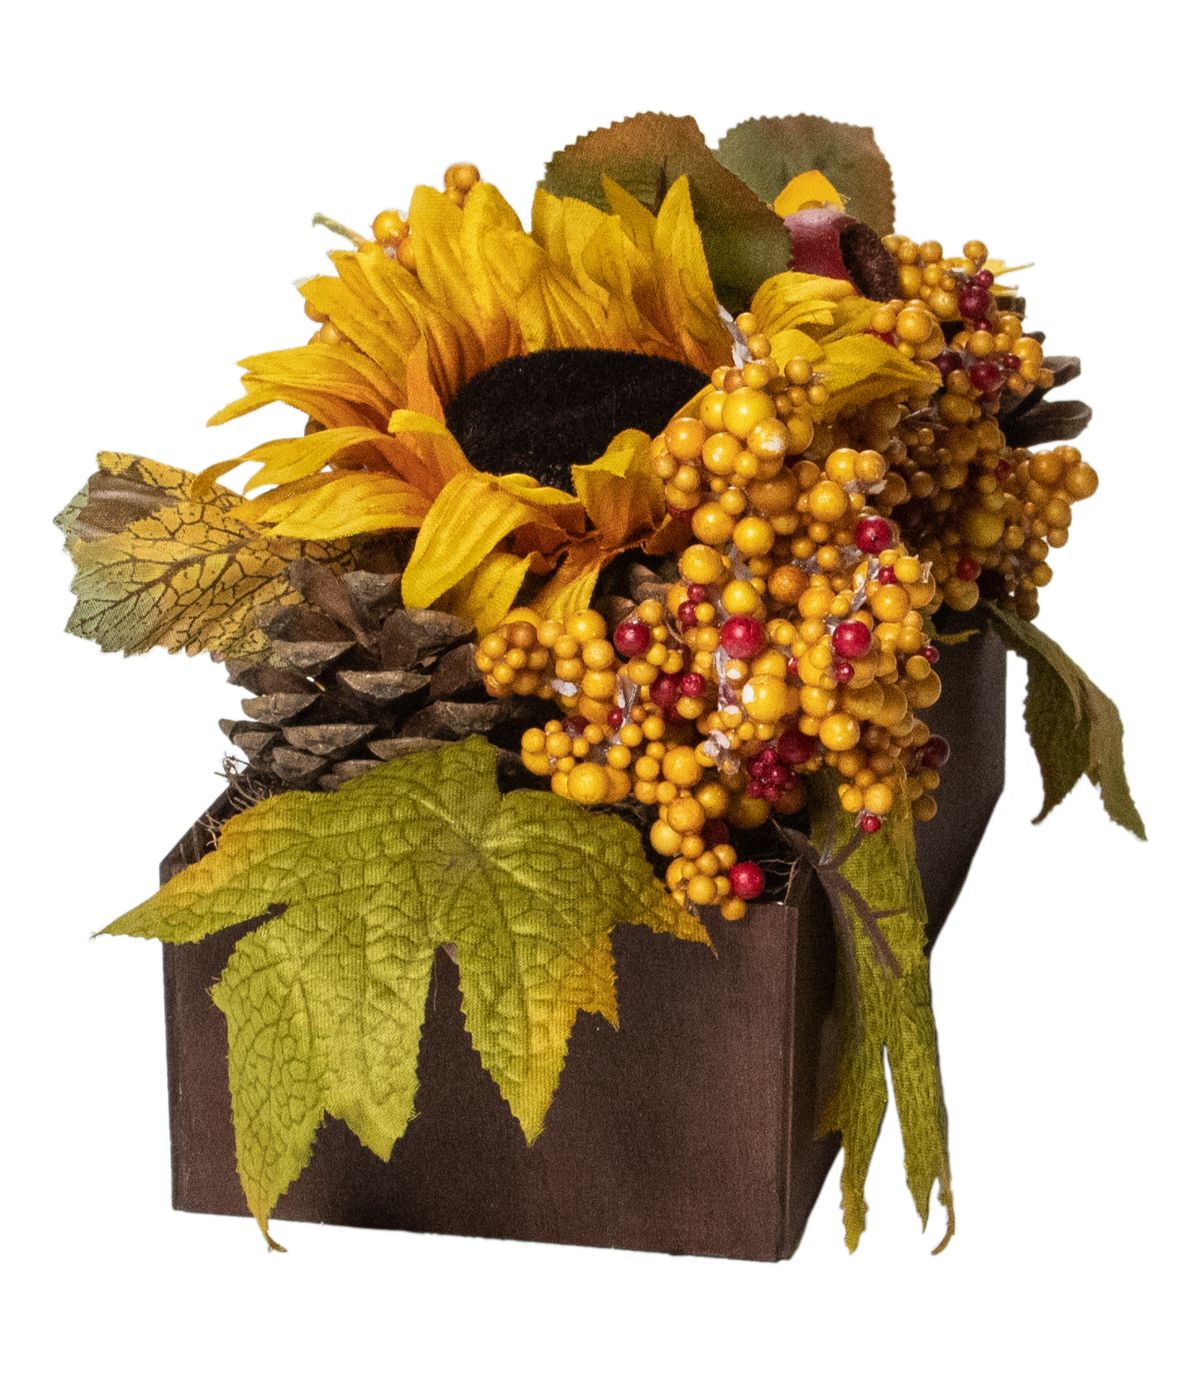 Yellow and Brown Sunflowers and Leaves Fall Harvest Floral Arrangement Brown